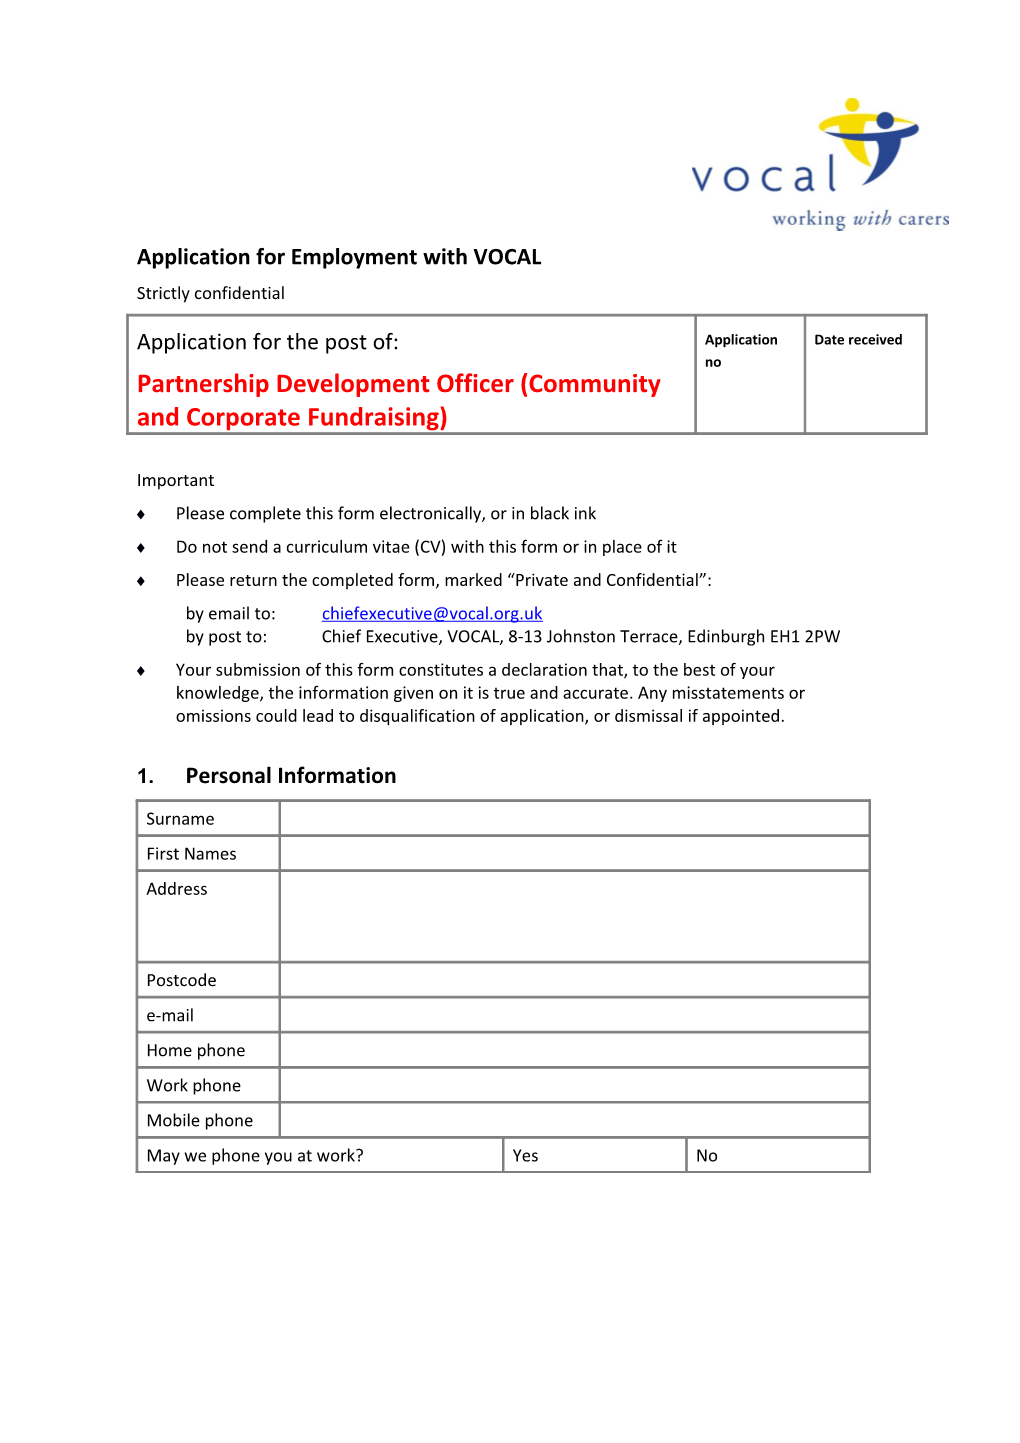 Application for Employment with VOCAL